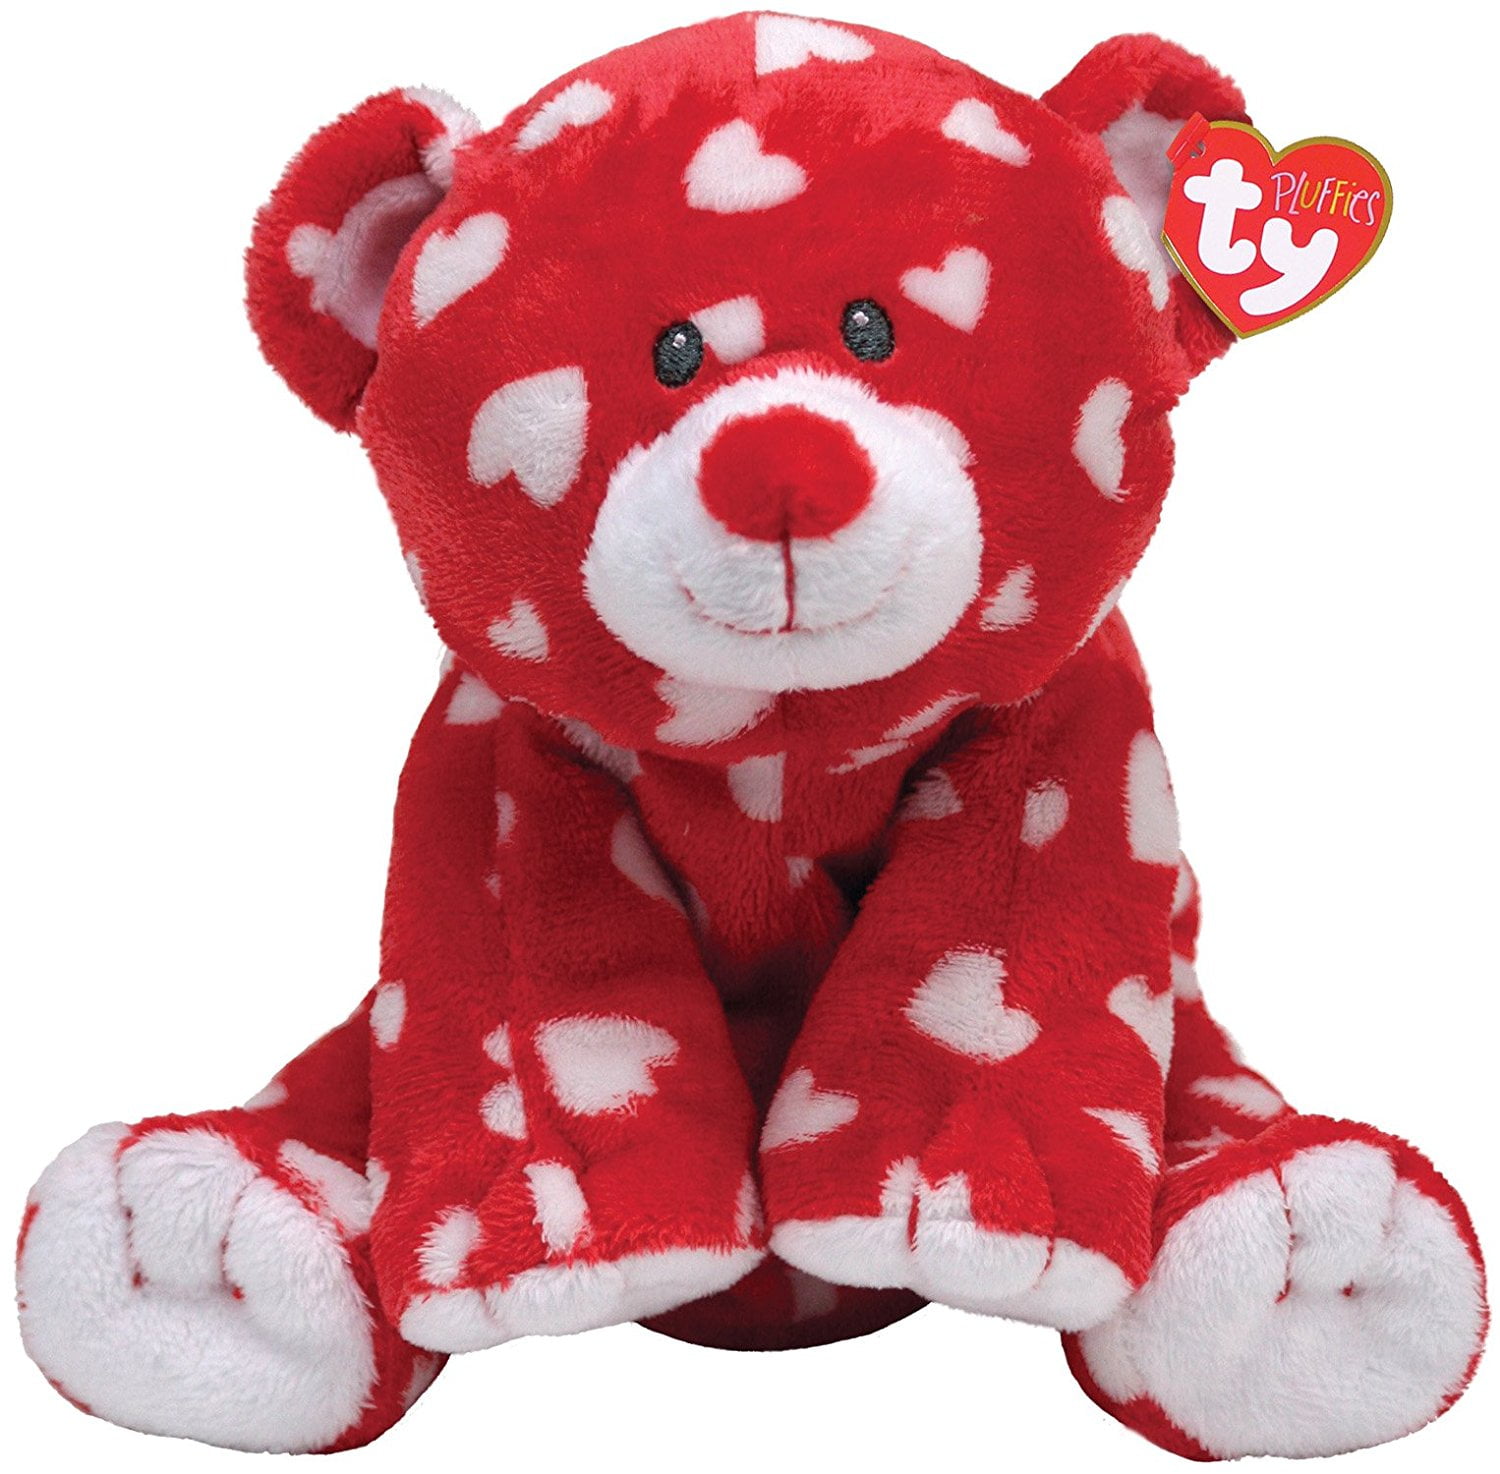 Ty Pluffies Dreamly Bear red white Hearts print Soft plush stuffed toy 